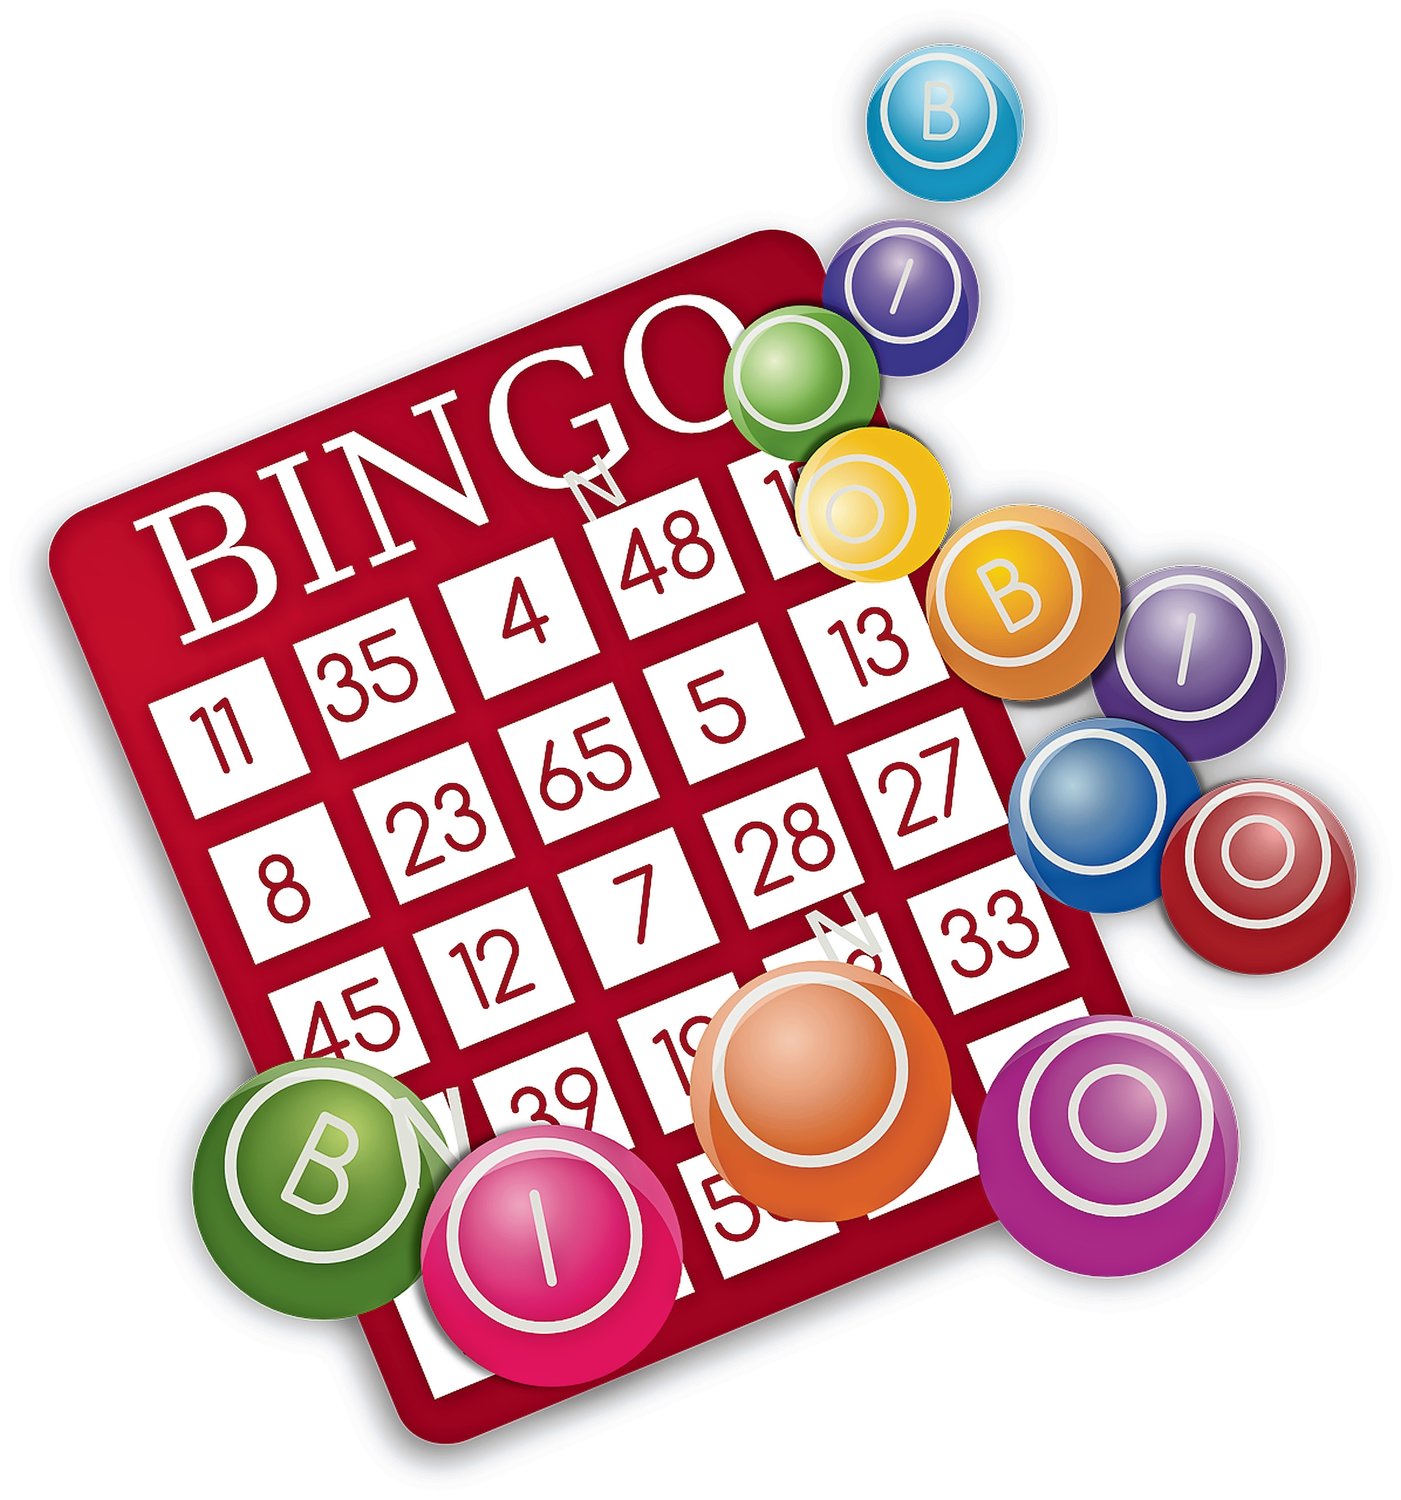 The Tommy Brull Foundation will hold a virtual bingo event to raise money for Camp Anchor on Aug. 5 at 7 and 8:30 p.m.